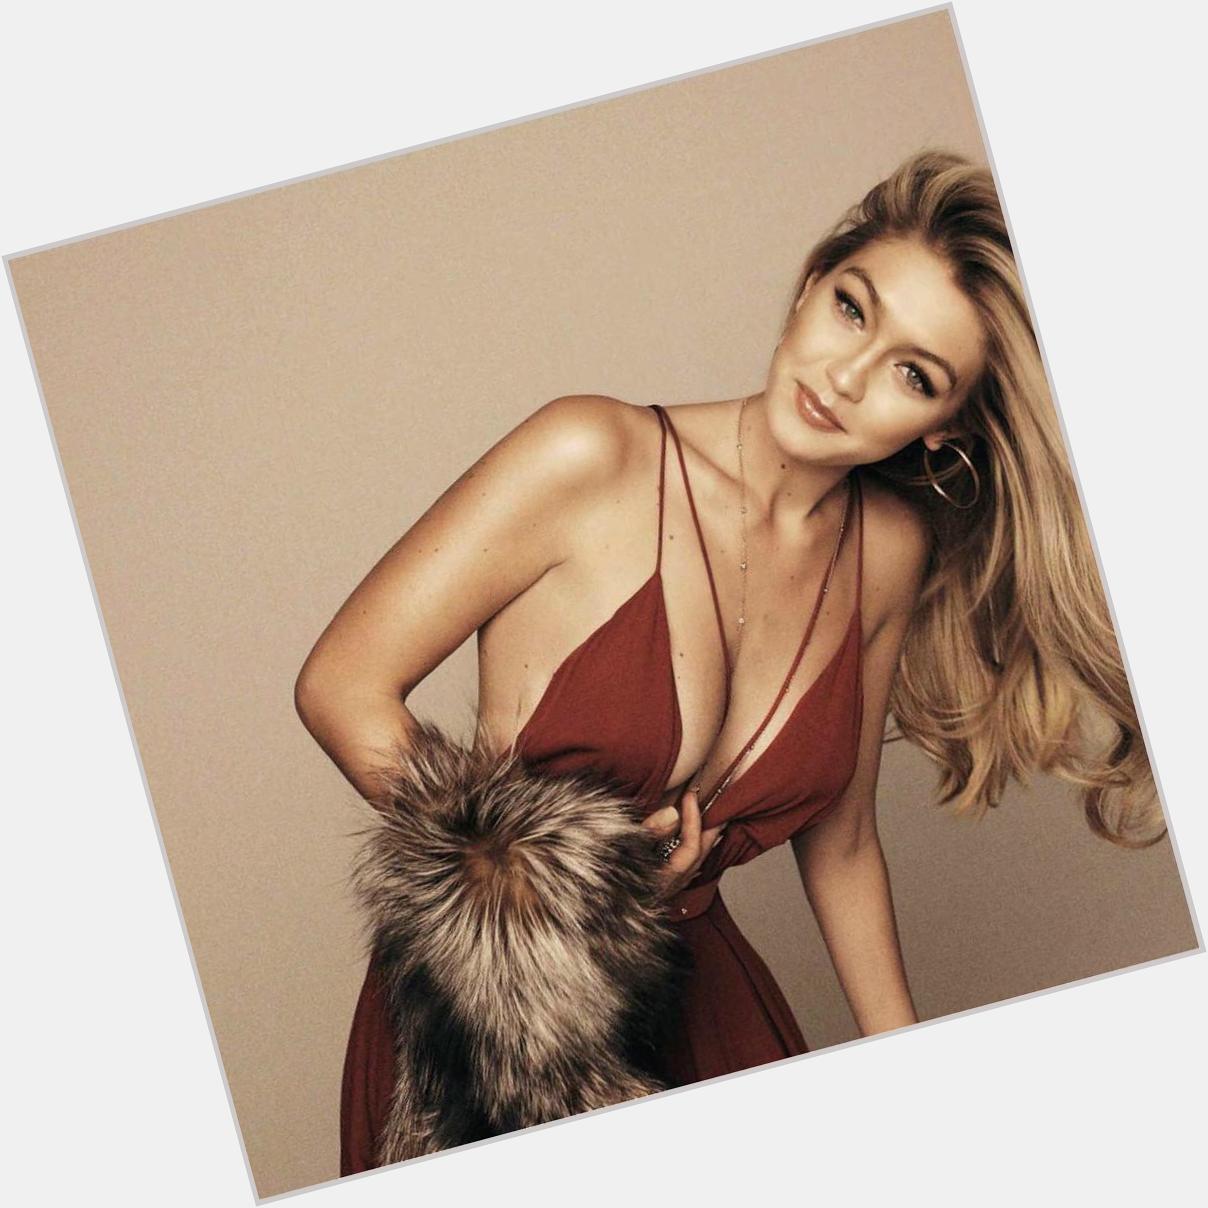 Happy birthday to the one and only amazingly gorgeous Gigi Hadid!  